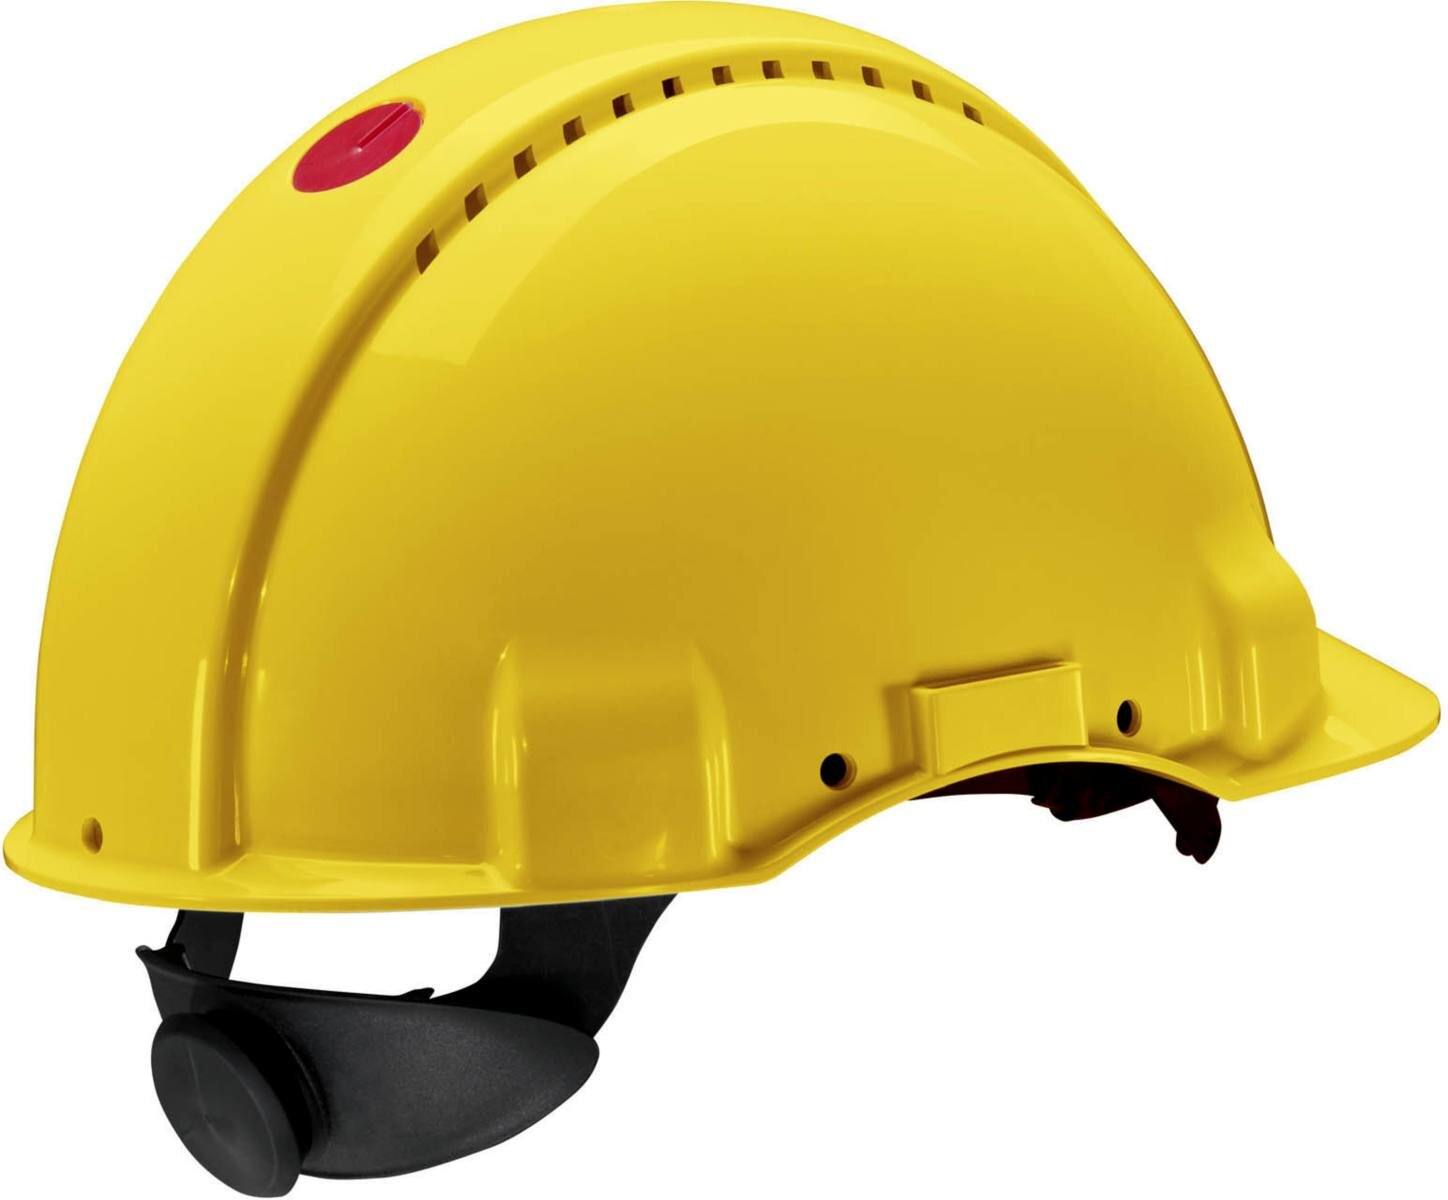 3M Safety helmet, Uvicator, ratchet fastening, non-ventilated, dielectric 440 V, plastic welding tape, yellow, G3001NUV-GU